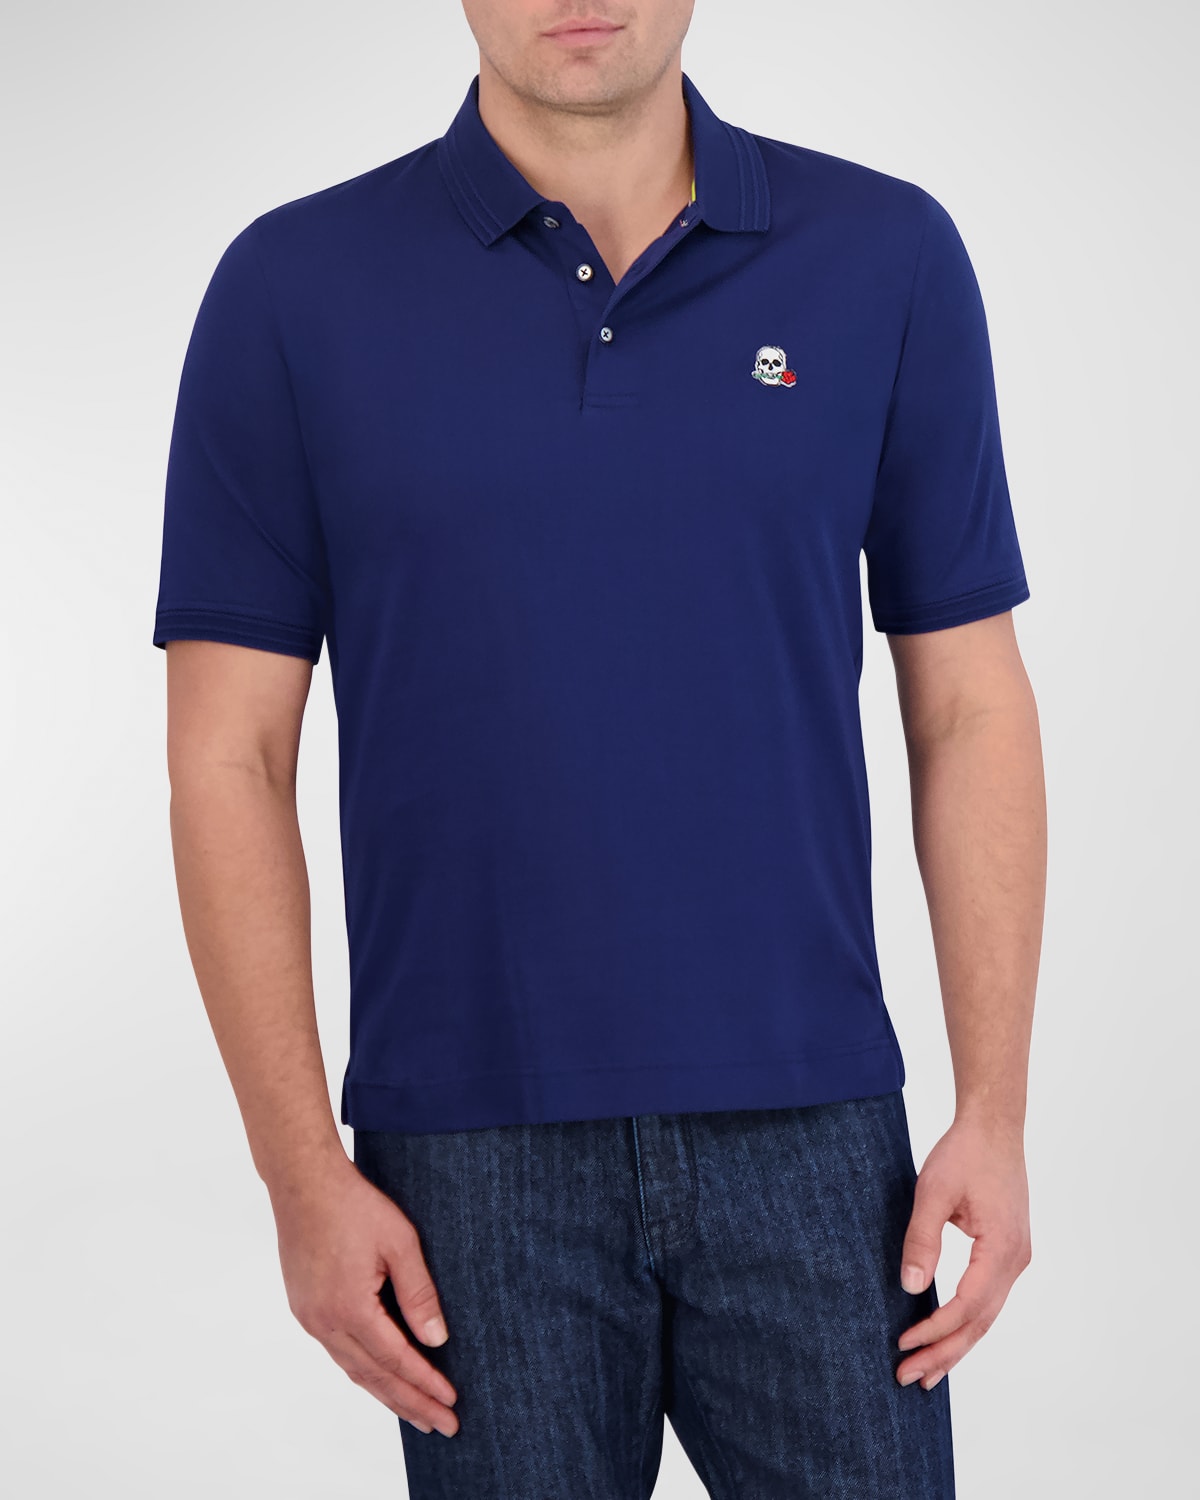 Men's The Player Knit Polo Shirt